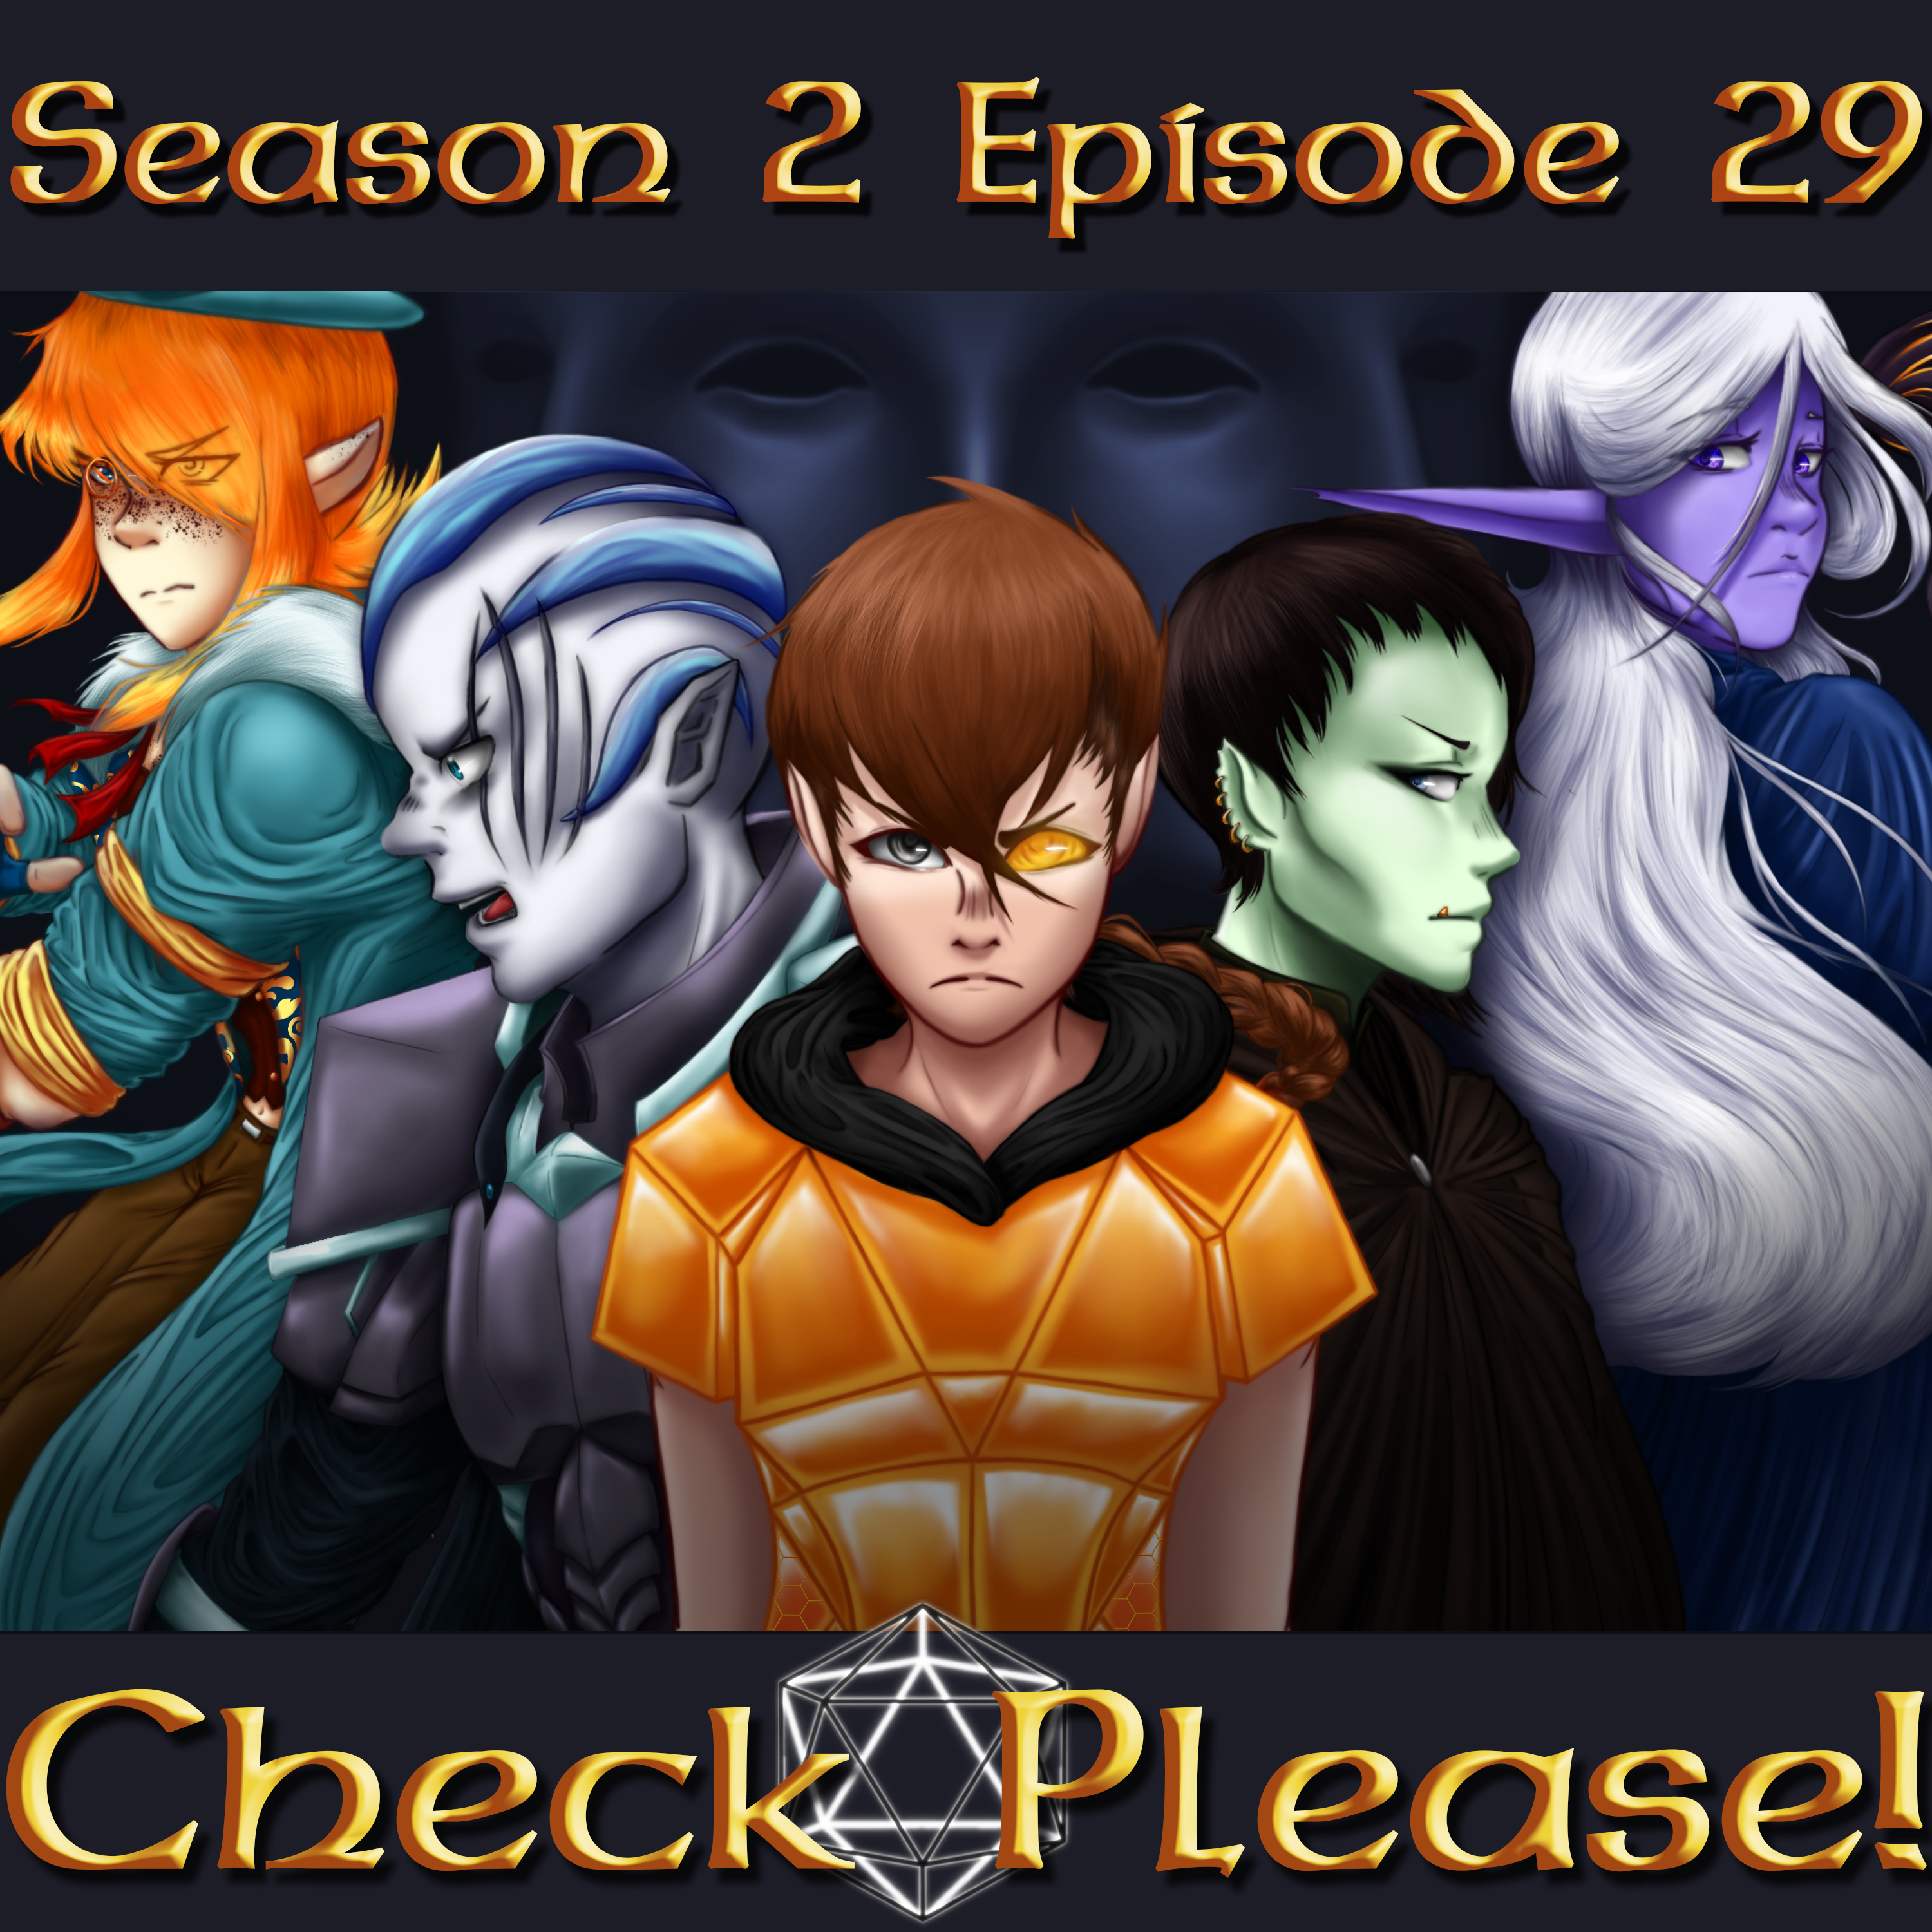 Check Please! S2 E29: Dragons, and Slugs, and Hags, Oh My!